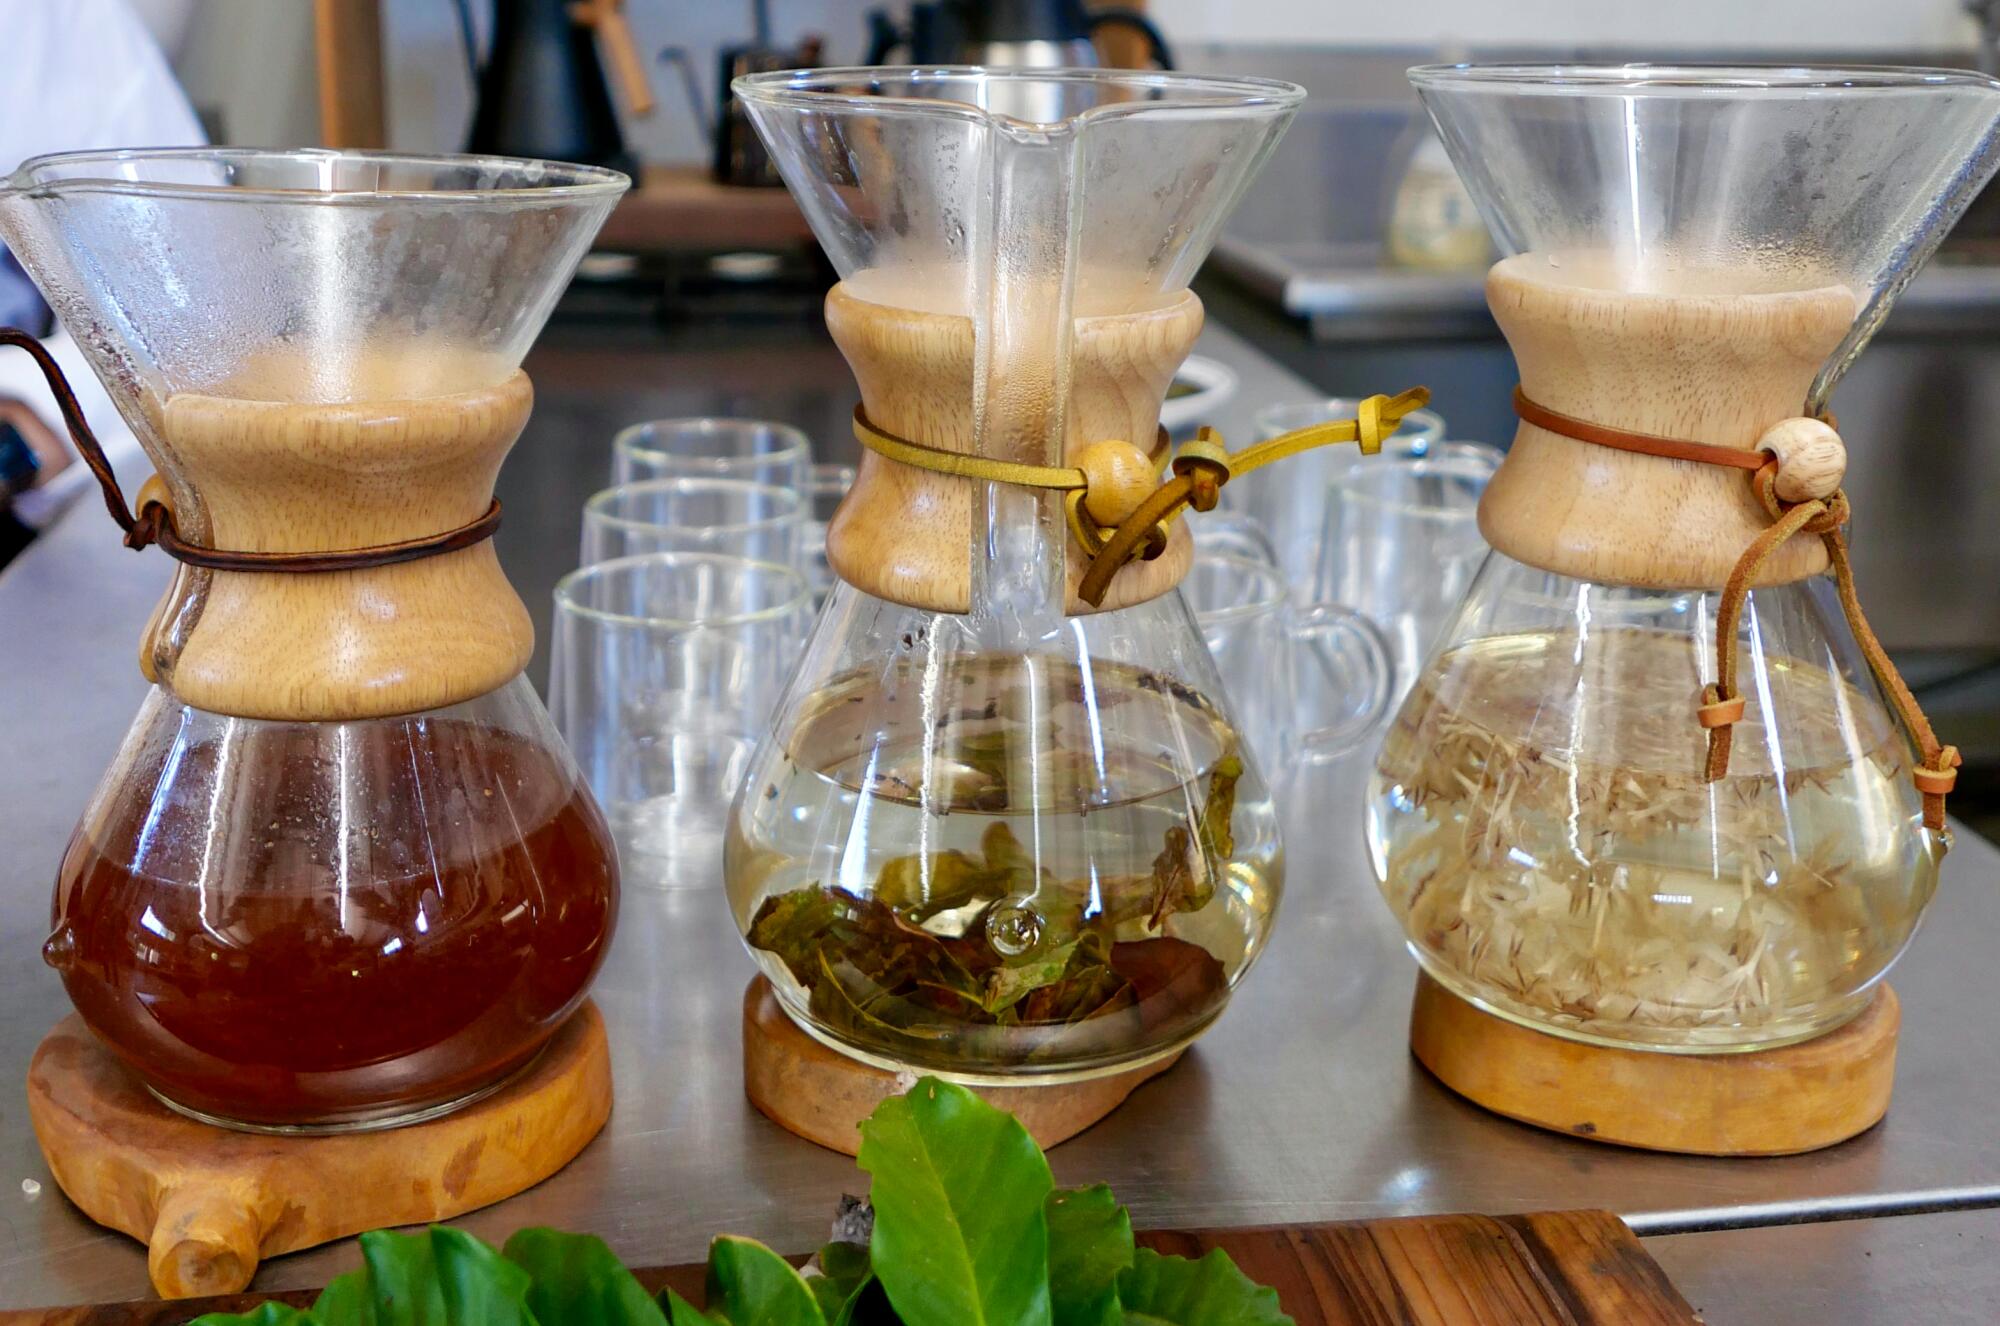 Various parts of the coffee plant, including leaves and flowers, to prepare infusions.